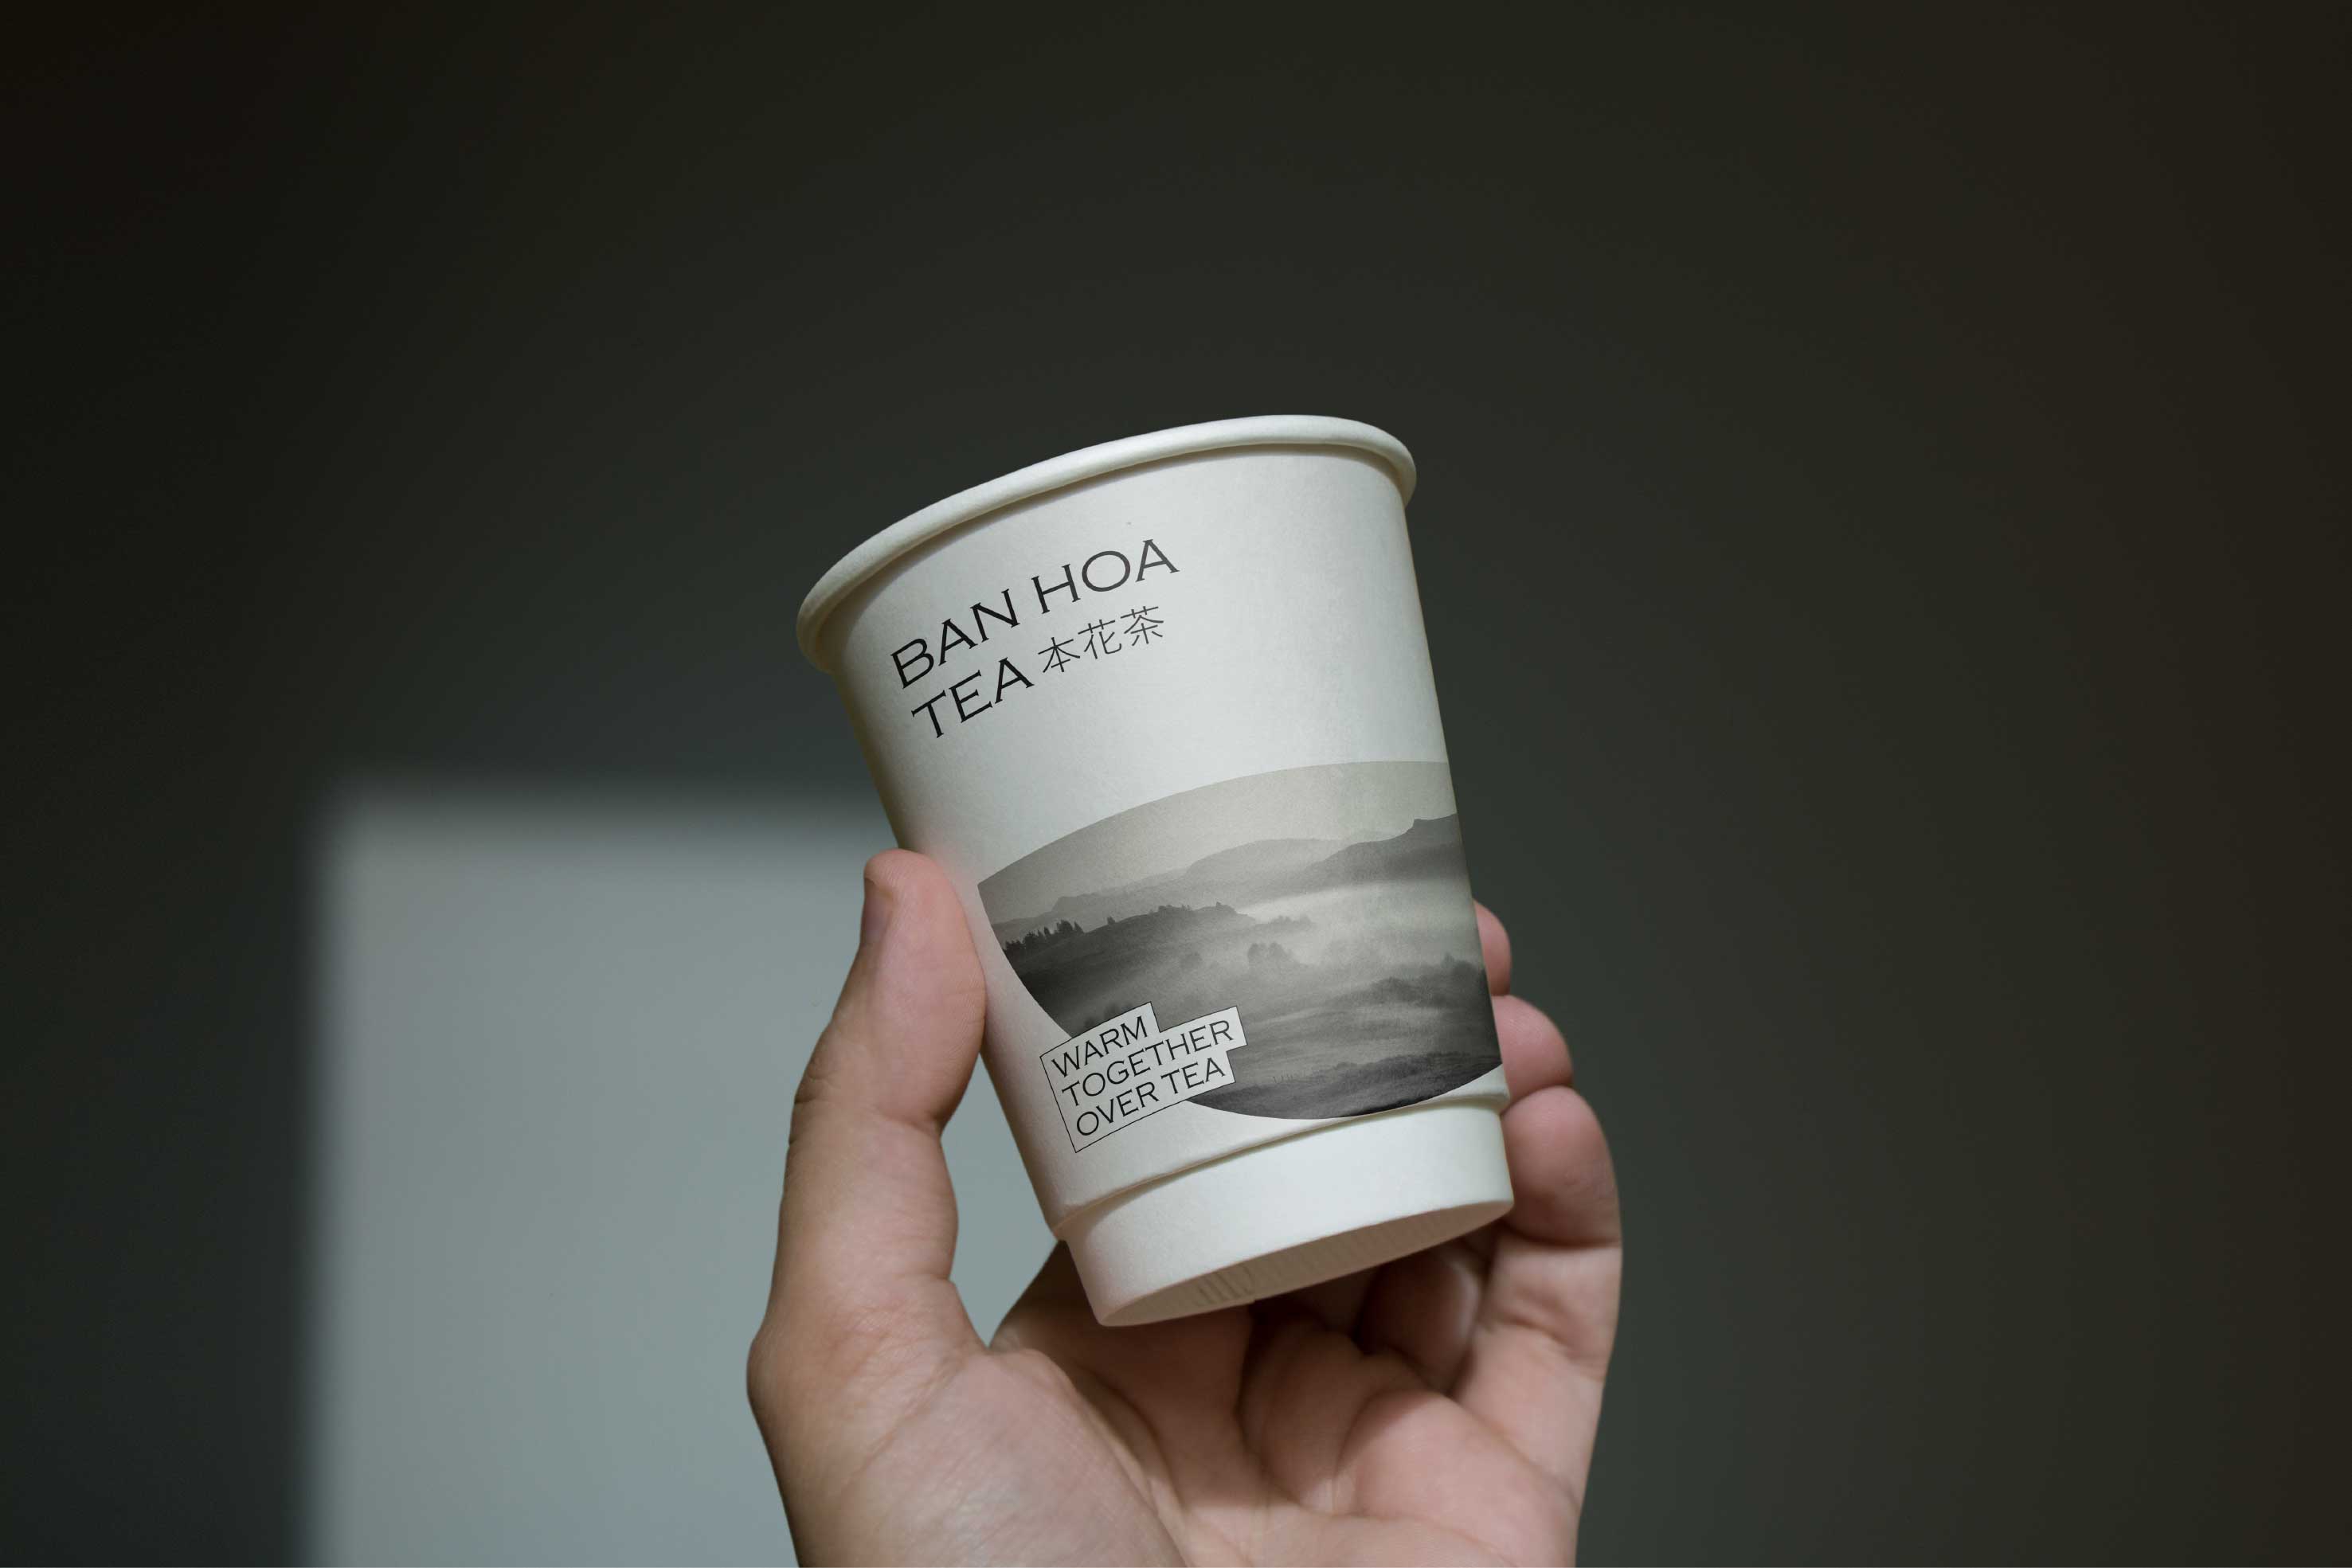 Ban Hoa Tea Visual Identity and Packaging Design by Tign Creative